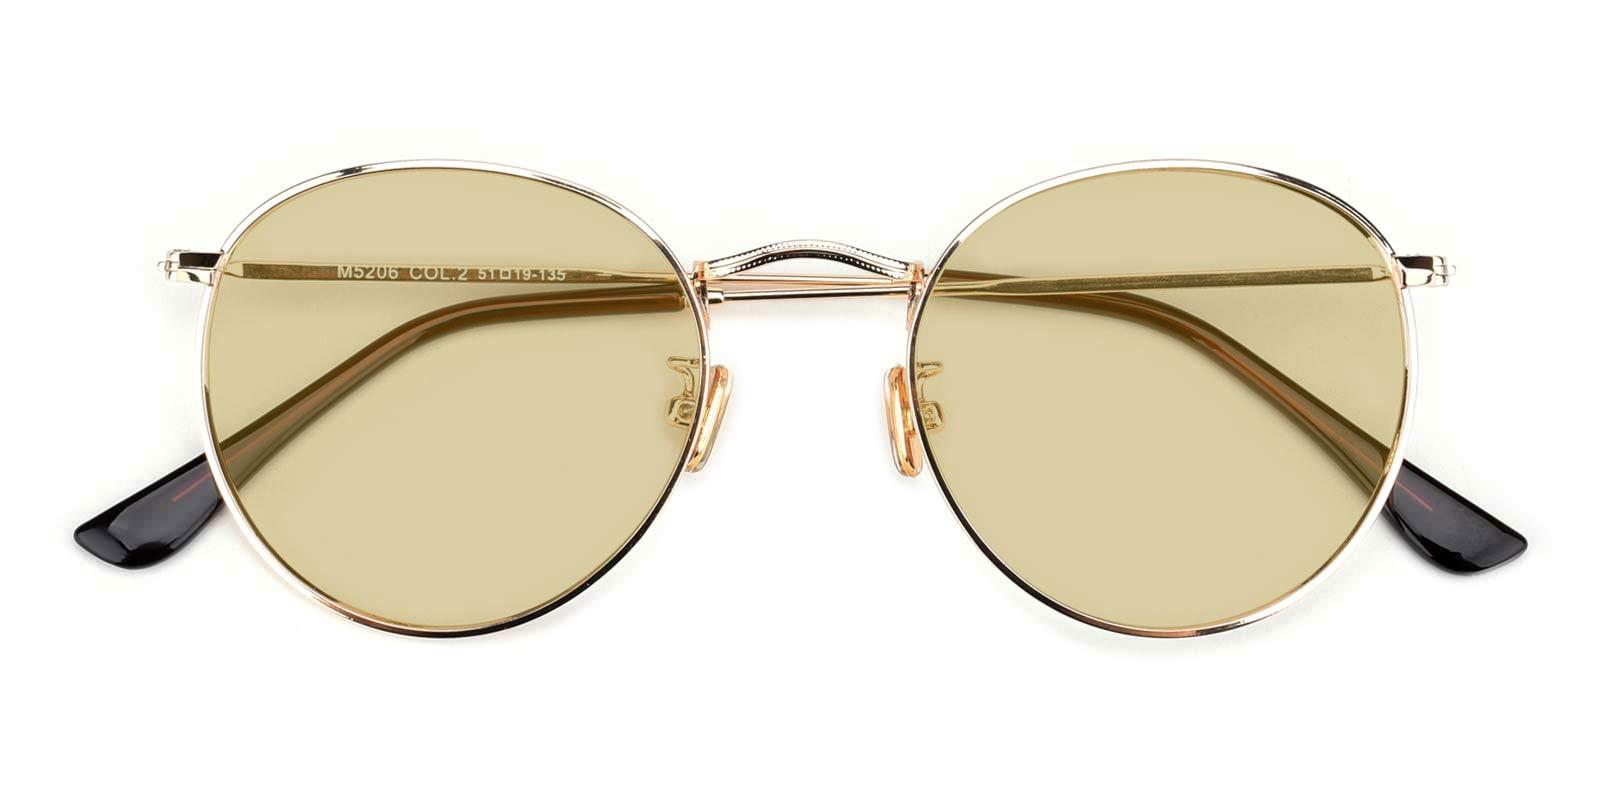 Canary-Gold-Round-Metal-Eyeglasses-detail